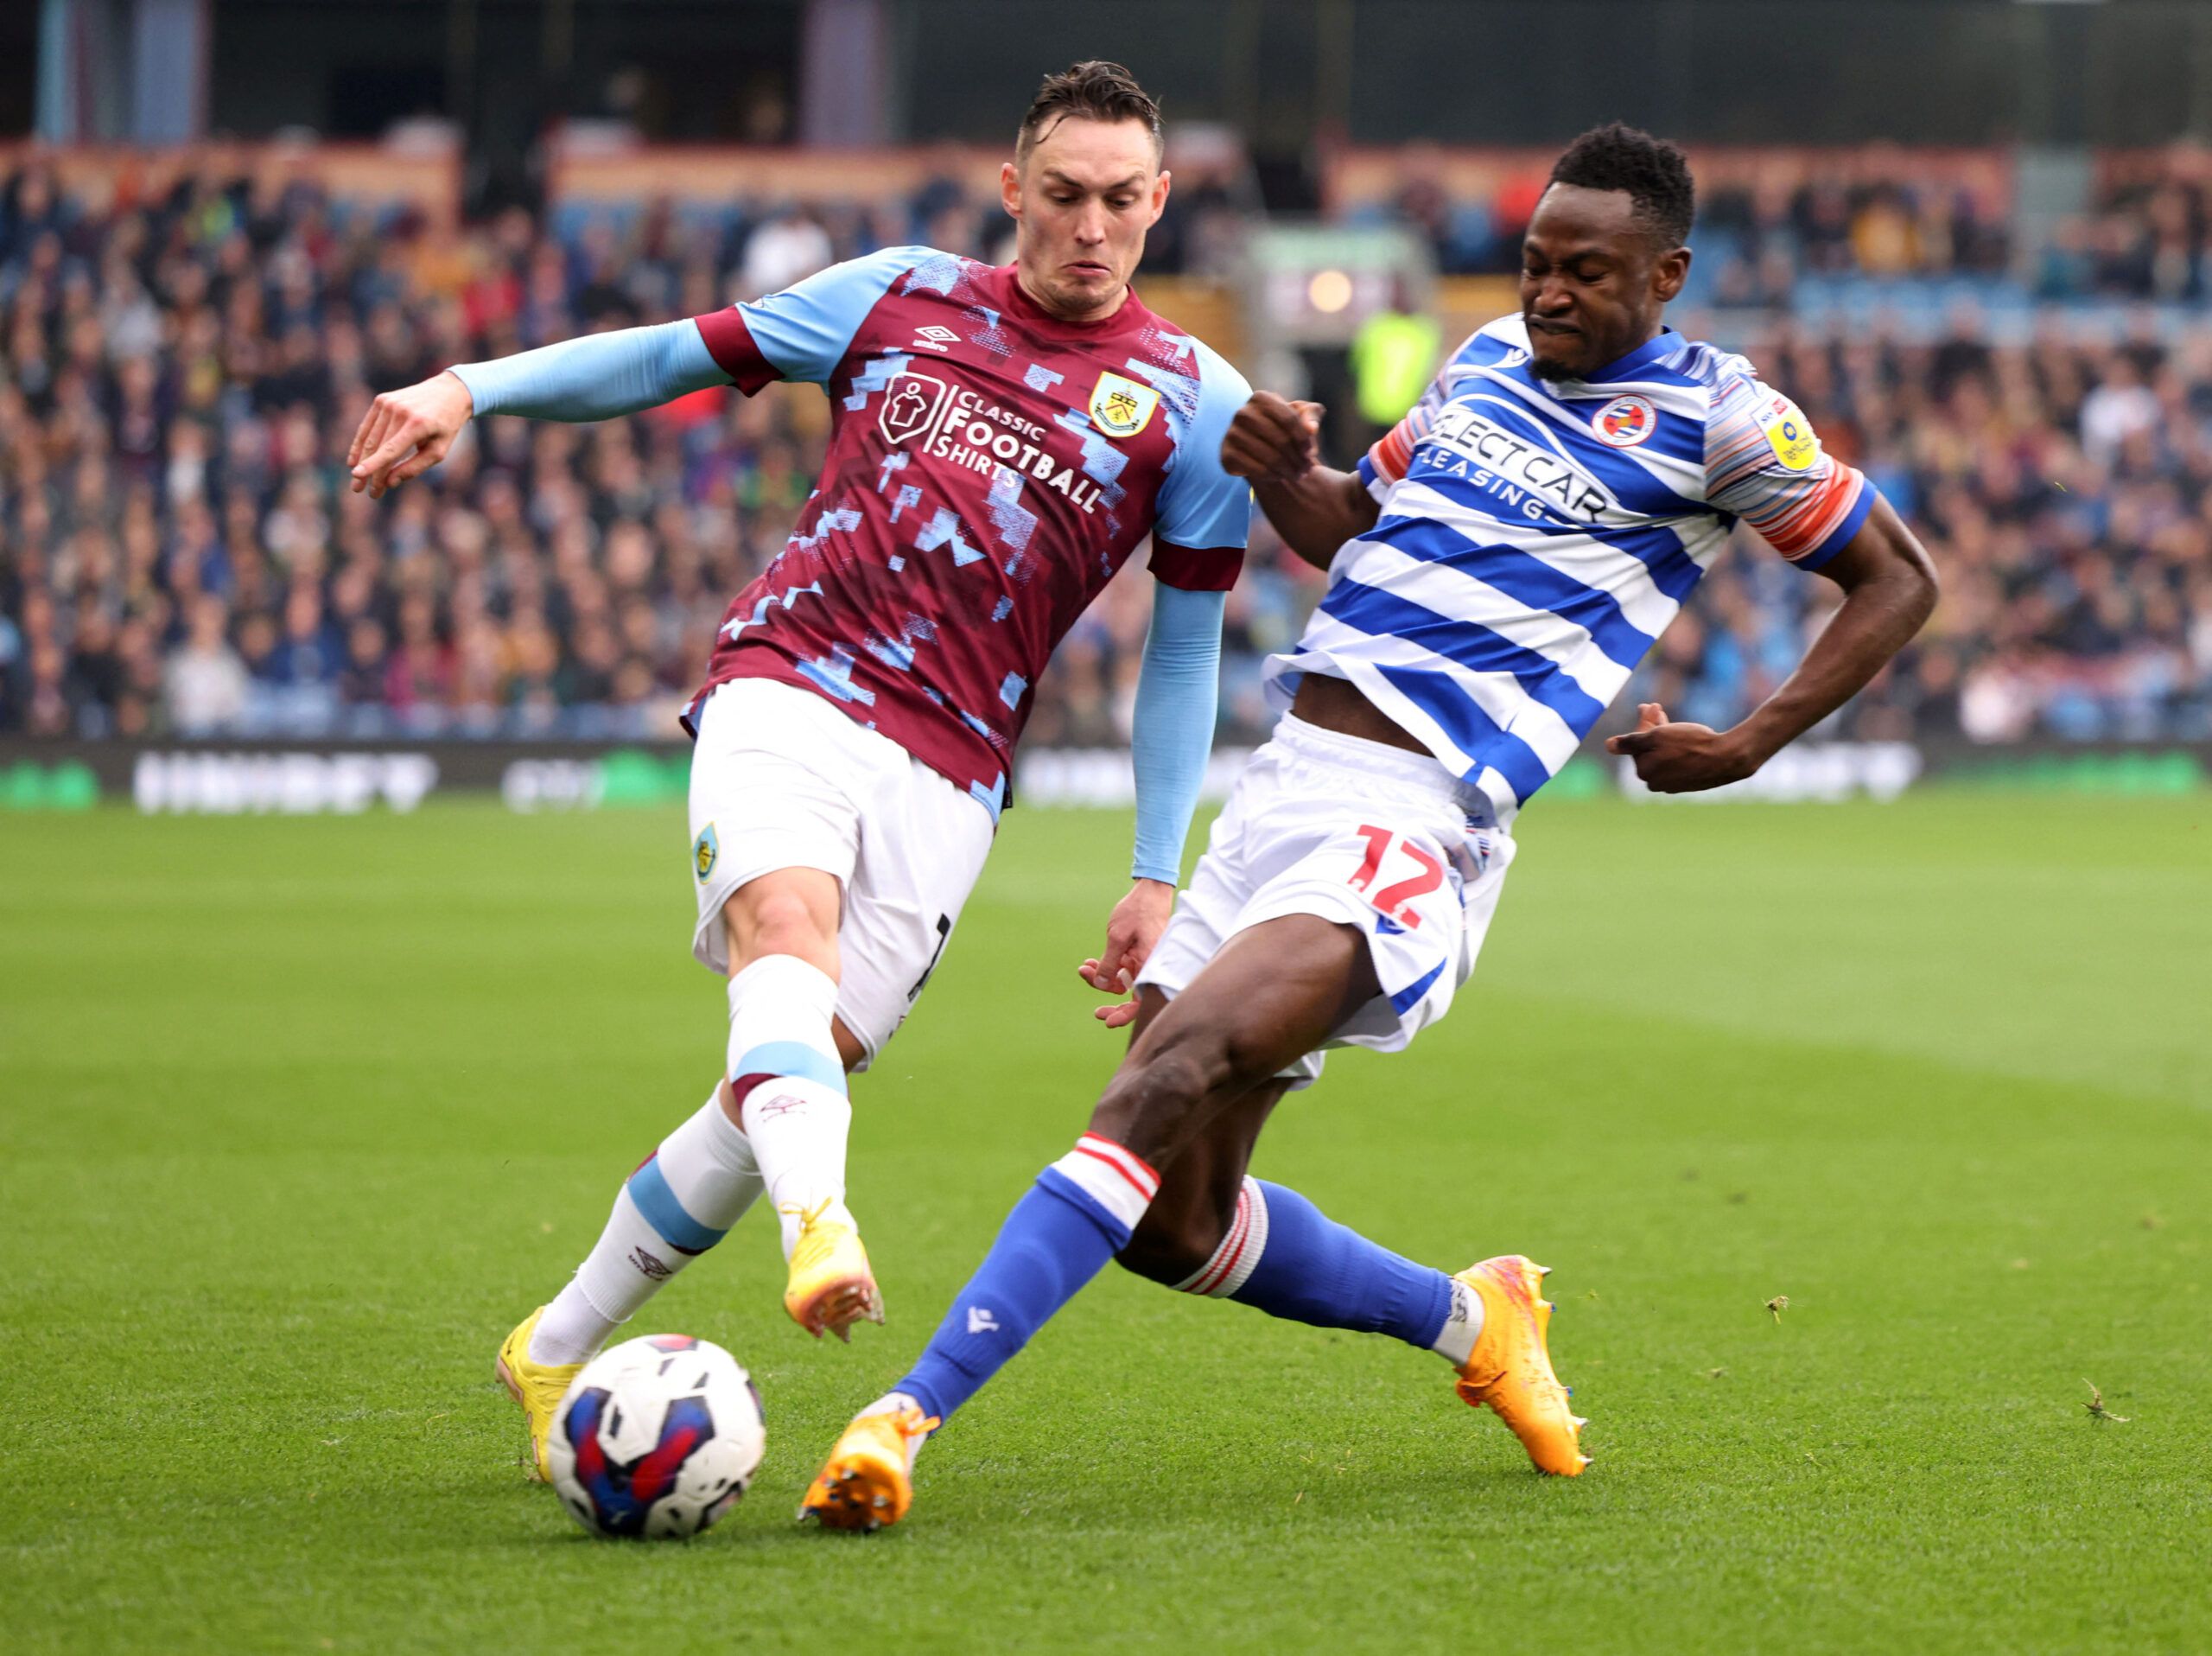 Soccer Football - Championship - Burnley v Reading - Turf Moor, Burnley, Britain - October 29, 2022  Burnley's Connor Roberts in action with Reading's Baba Rahman  Action Images/John Clifton   EDITORIAL USE ONLY. No use with unauthorized audio, video, data, fixture lists, club/league logos or 